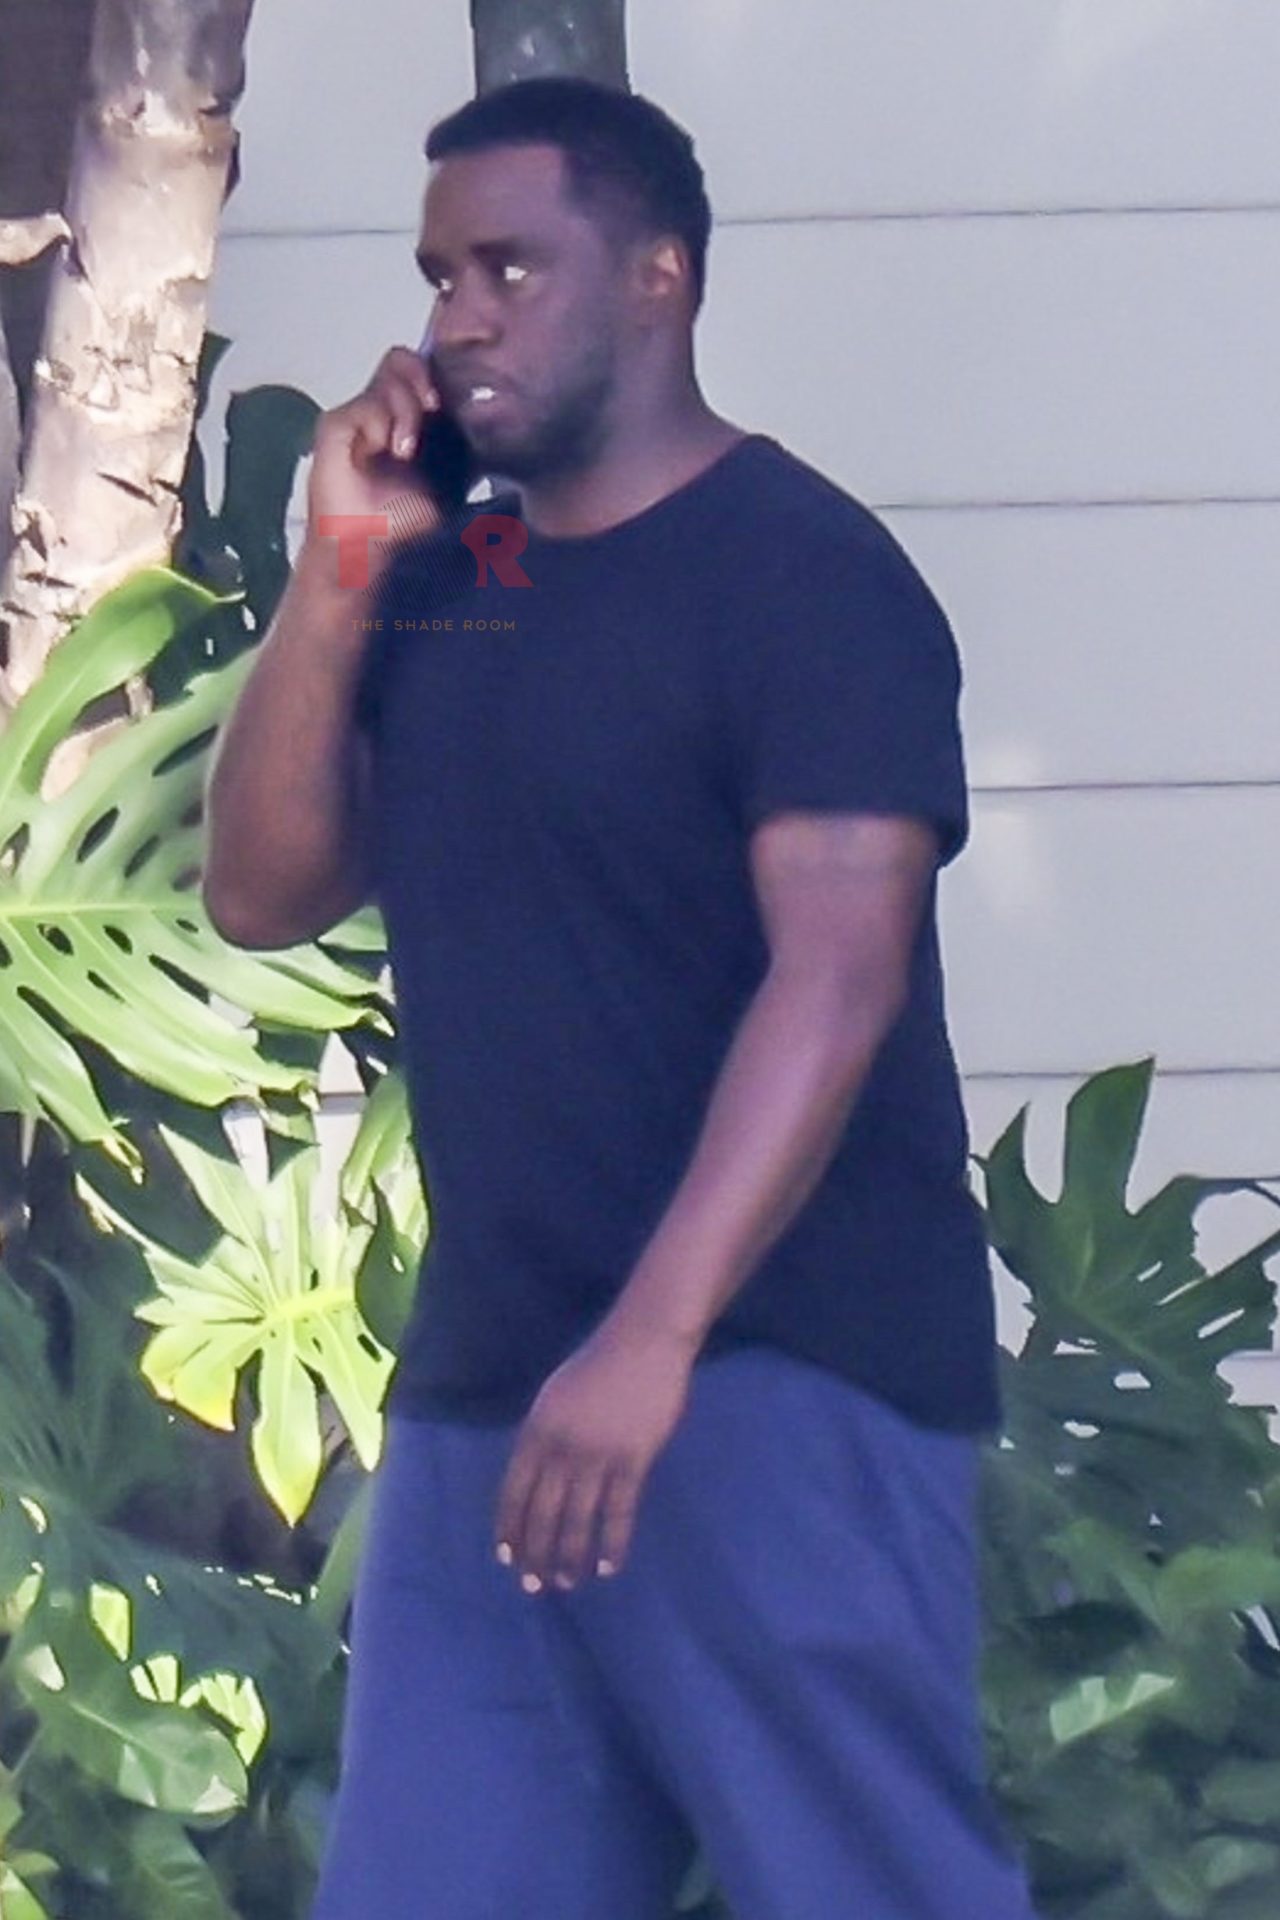 Sean Combs Pictured For The First Time Since Cassie Lawsuit & Settlement (Exclusive Photos)